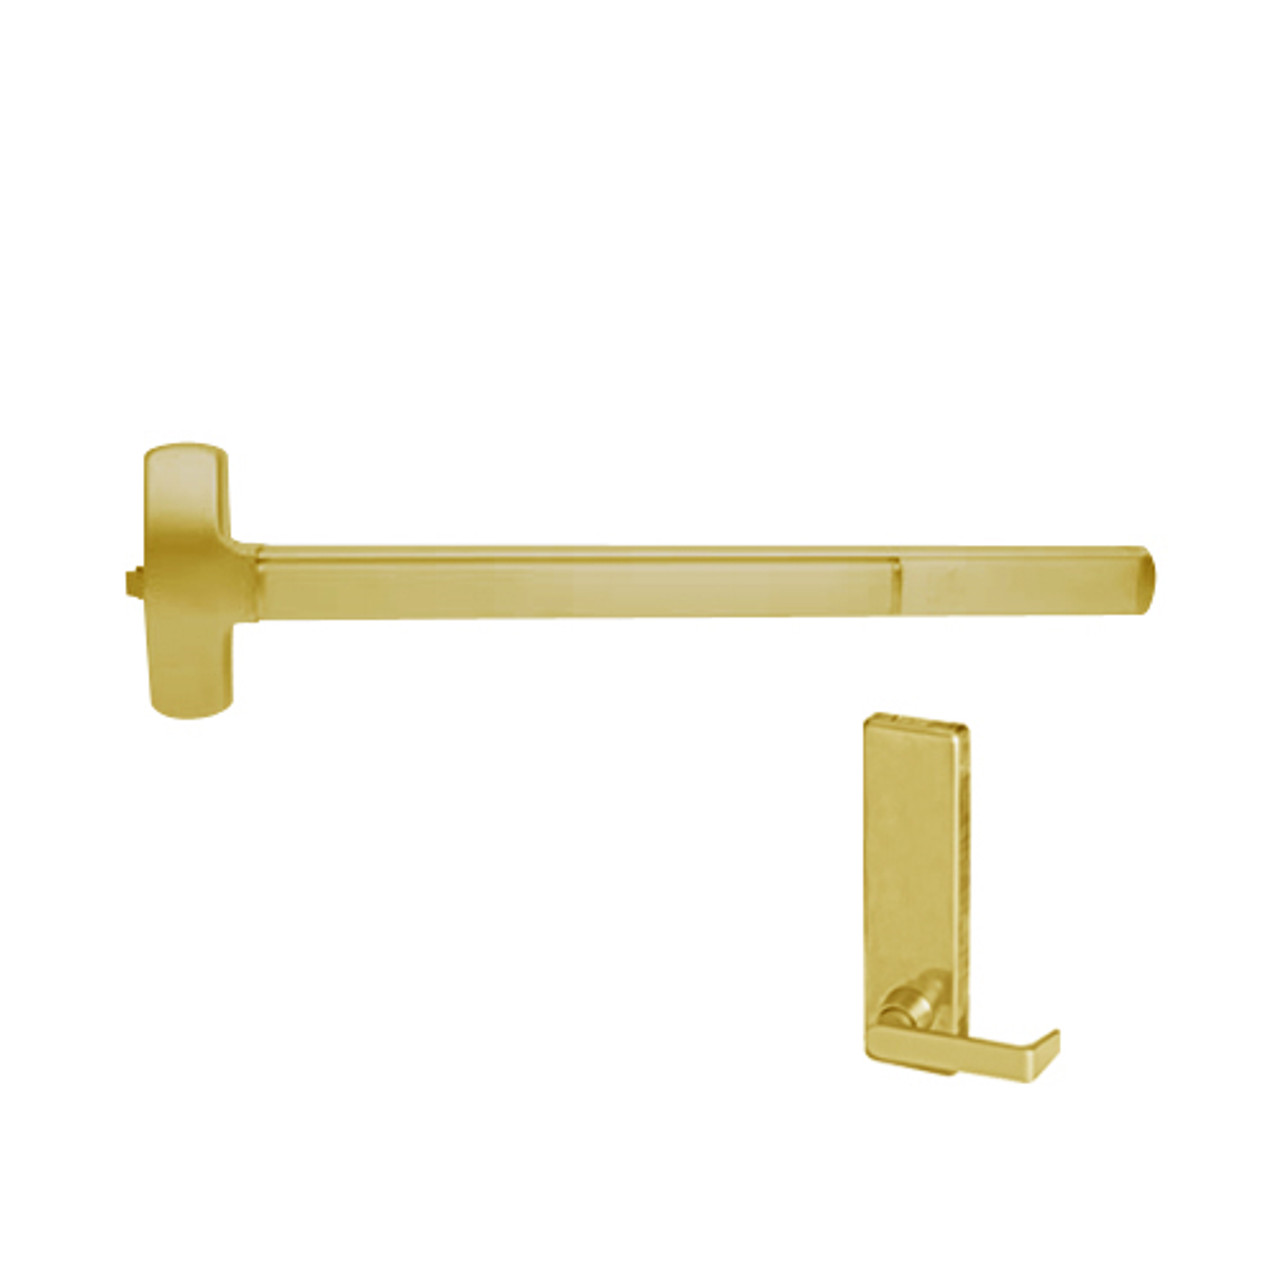 F-25-R-L-BE-DANE-US3-3-RHR Falcon Exit Device in Polished Brass